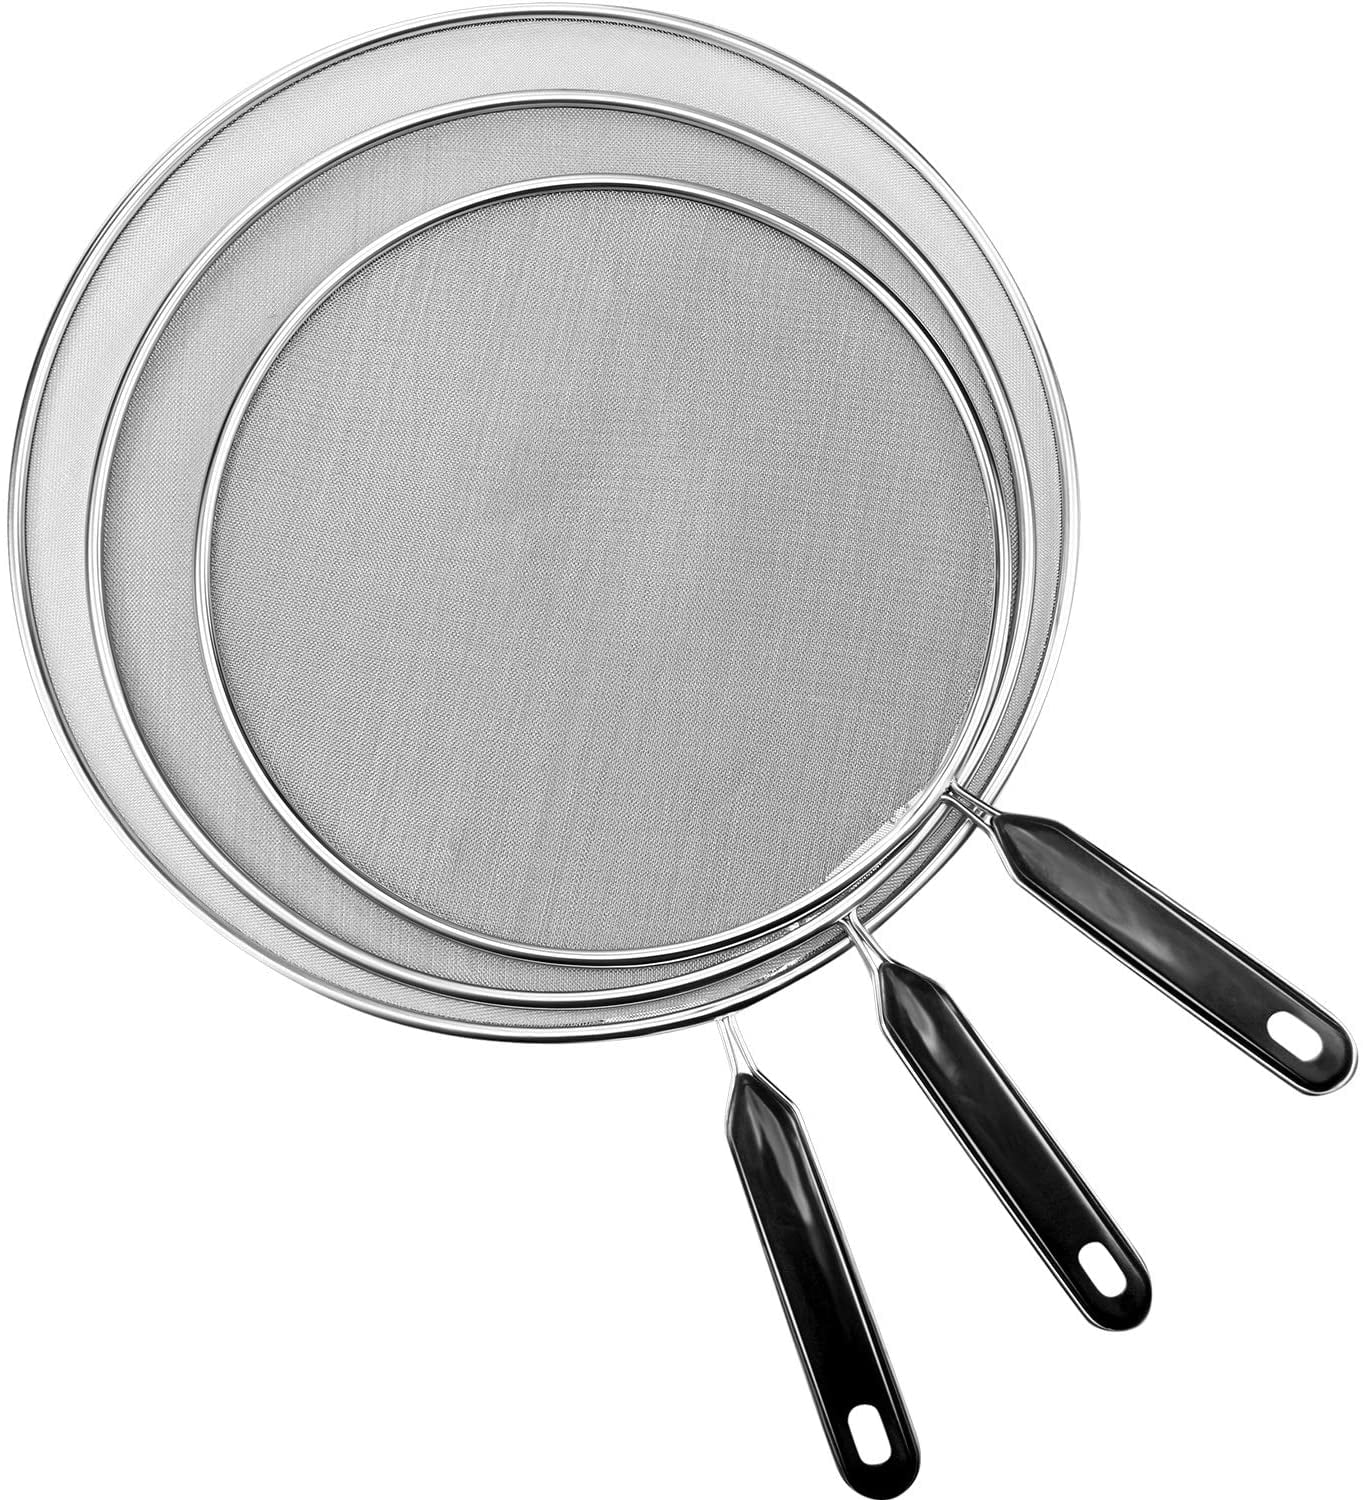 Stainless Steel Pan Splatter Guard Grease Guard Shield for Kitchen Frying Pan Cooking Supplies 9.8 Inch 11.5 Inch and 13 Inch 3 Pieces Grease Splatter Screen Mesh